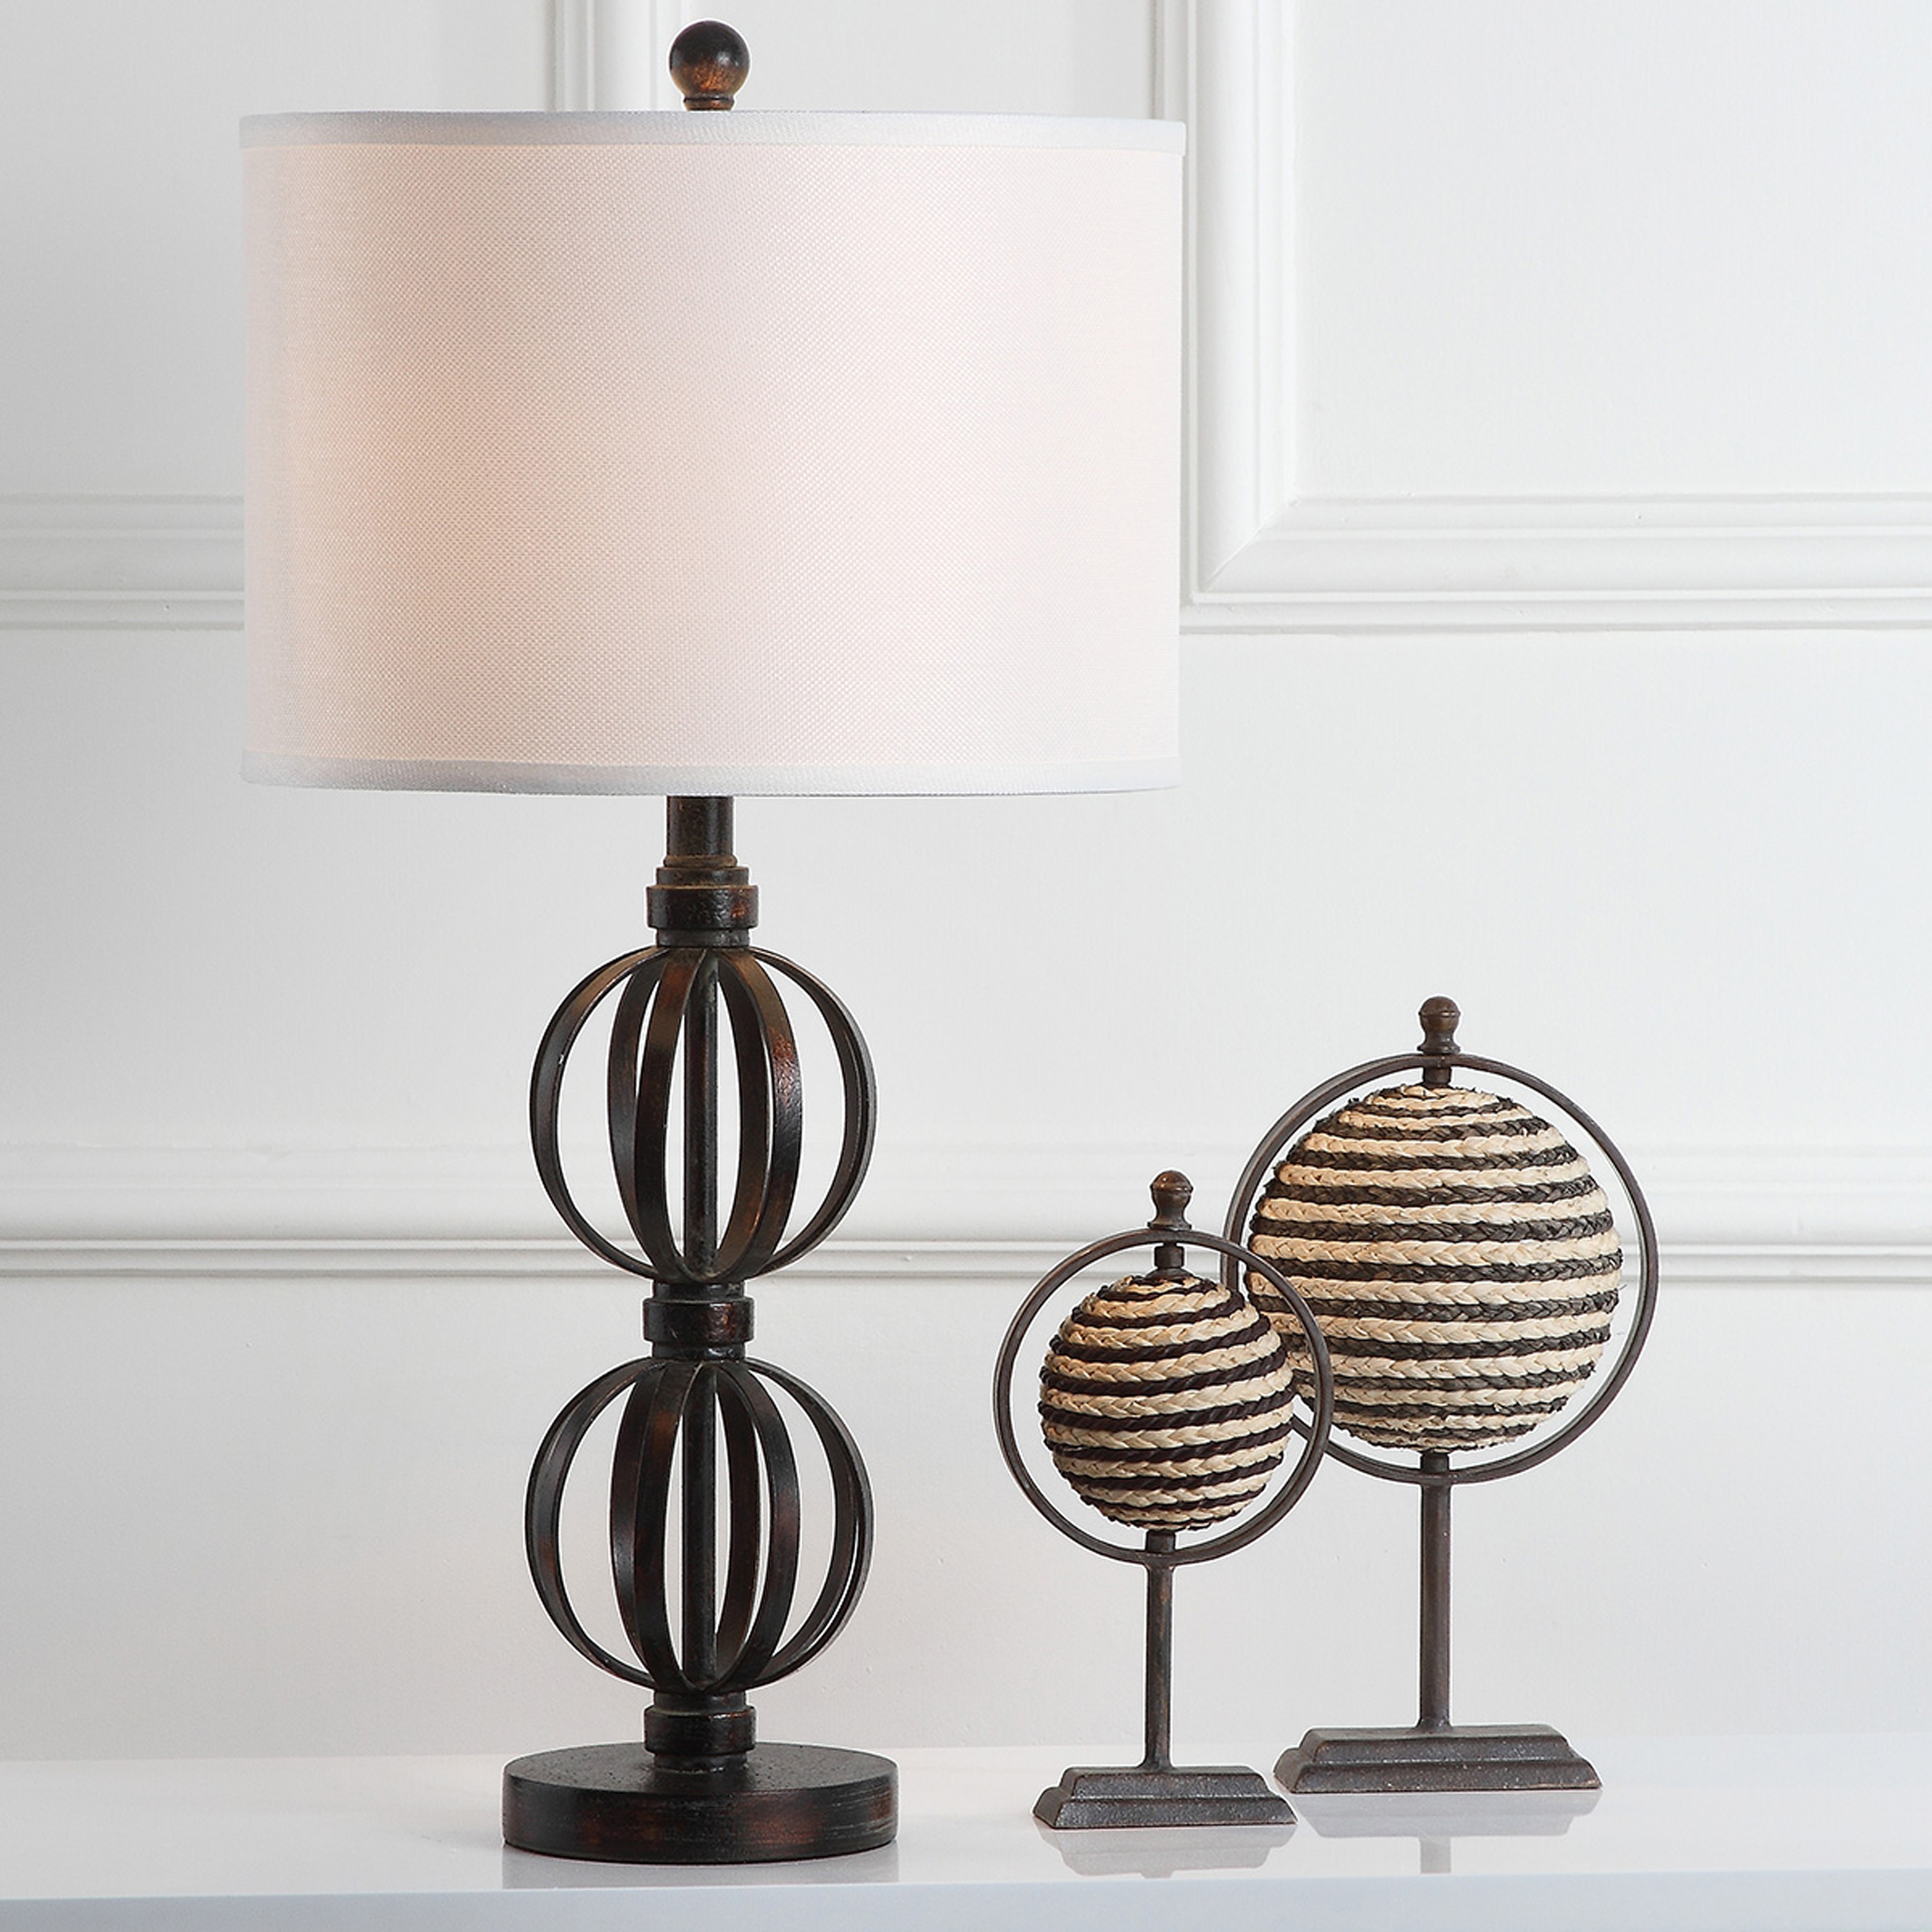 Calista 27.75-Inch H Double Sphere Table Lamp - Oil-Rubbed Bronze - Arlo Home - Image 2